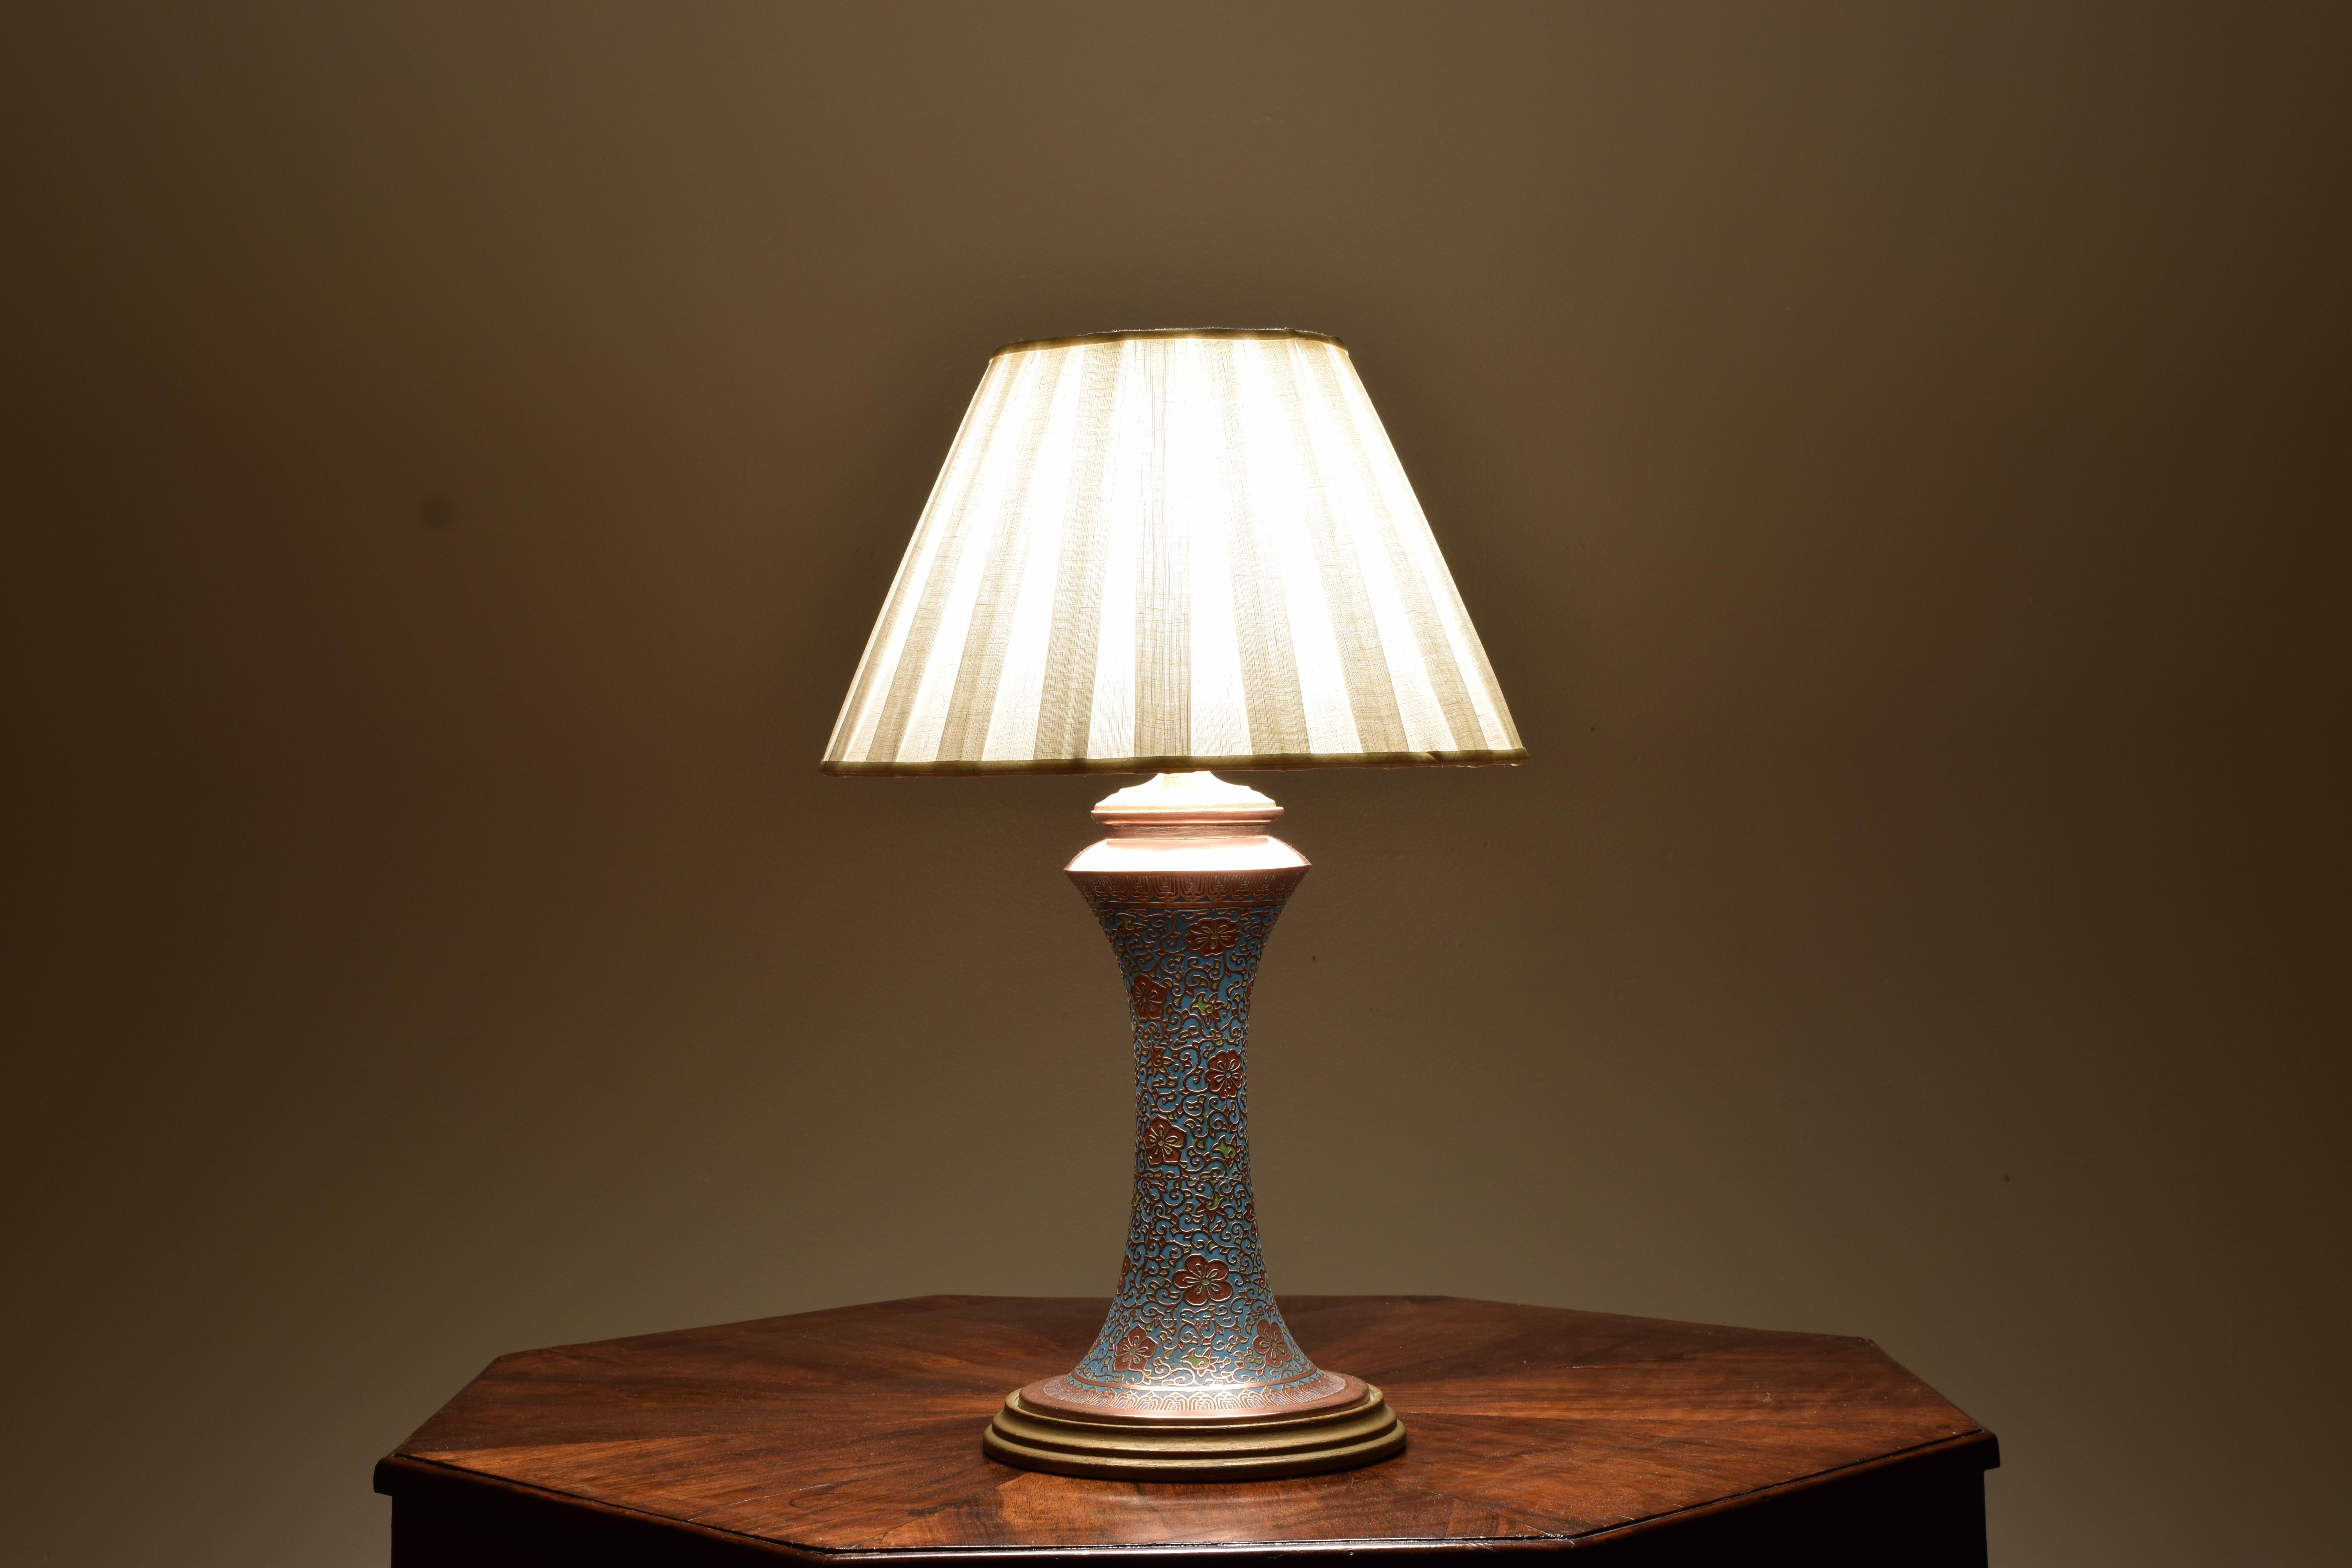 Early 20th Century Japanese Cloisonné Copper and Enamel Table Lamp, 1st Quarter 20th Century For Sale